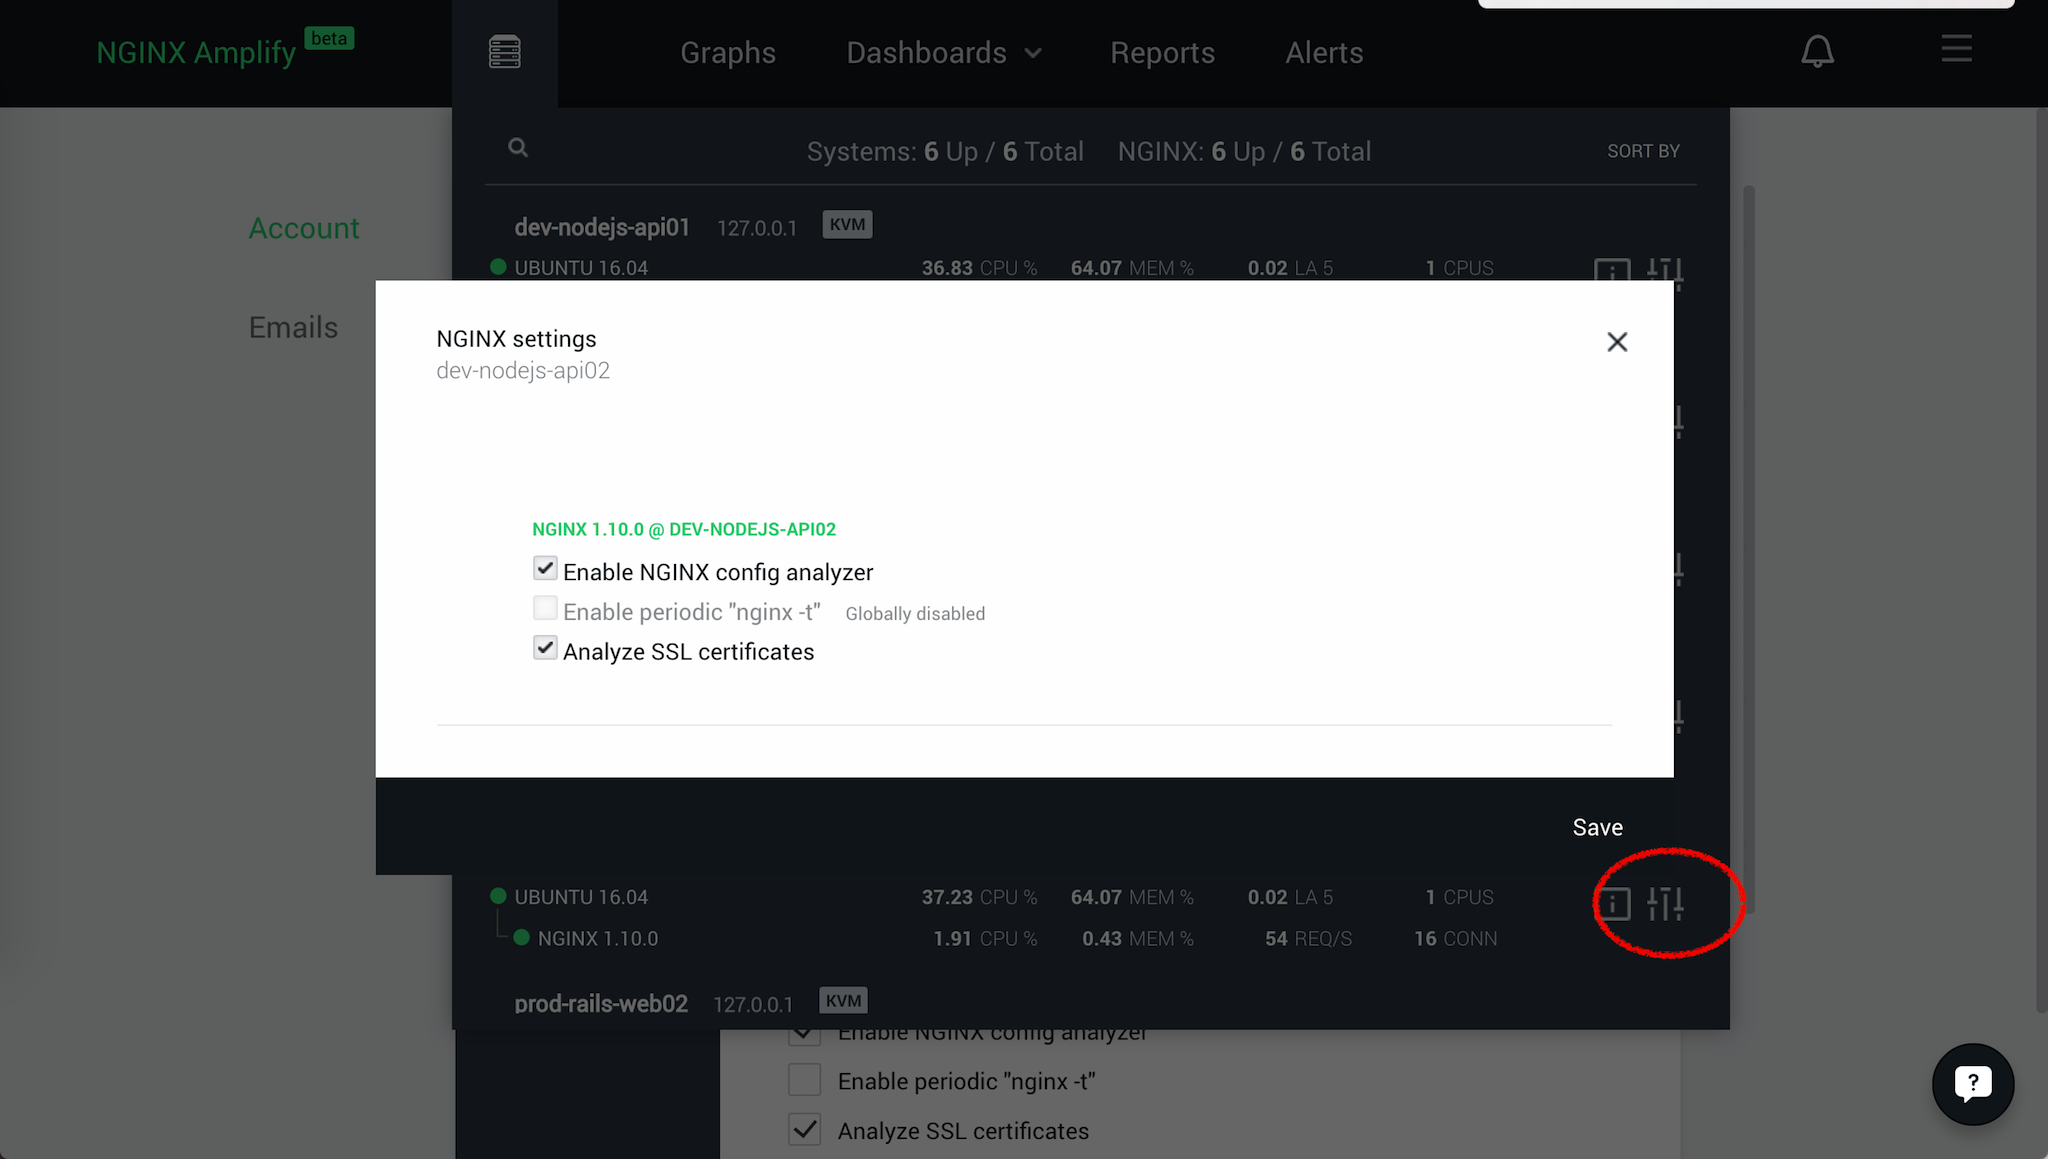 The &apos;NGINX settings&apos; panel for an individual system controls which types of NGINX configuration analysis are included in NGINX Amplify reporting